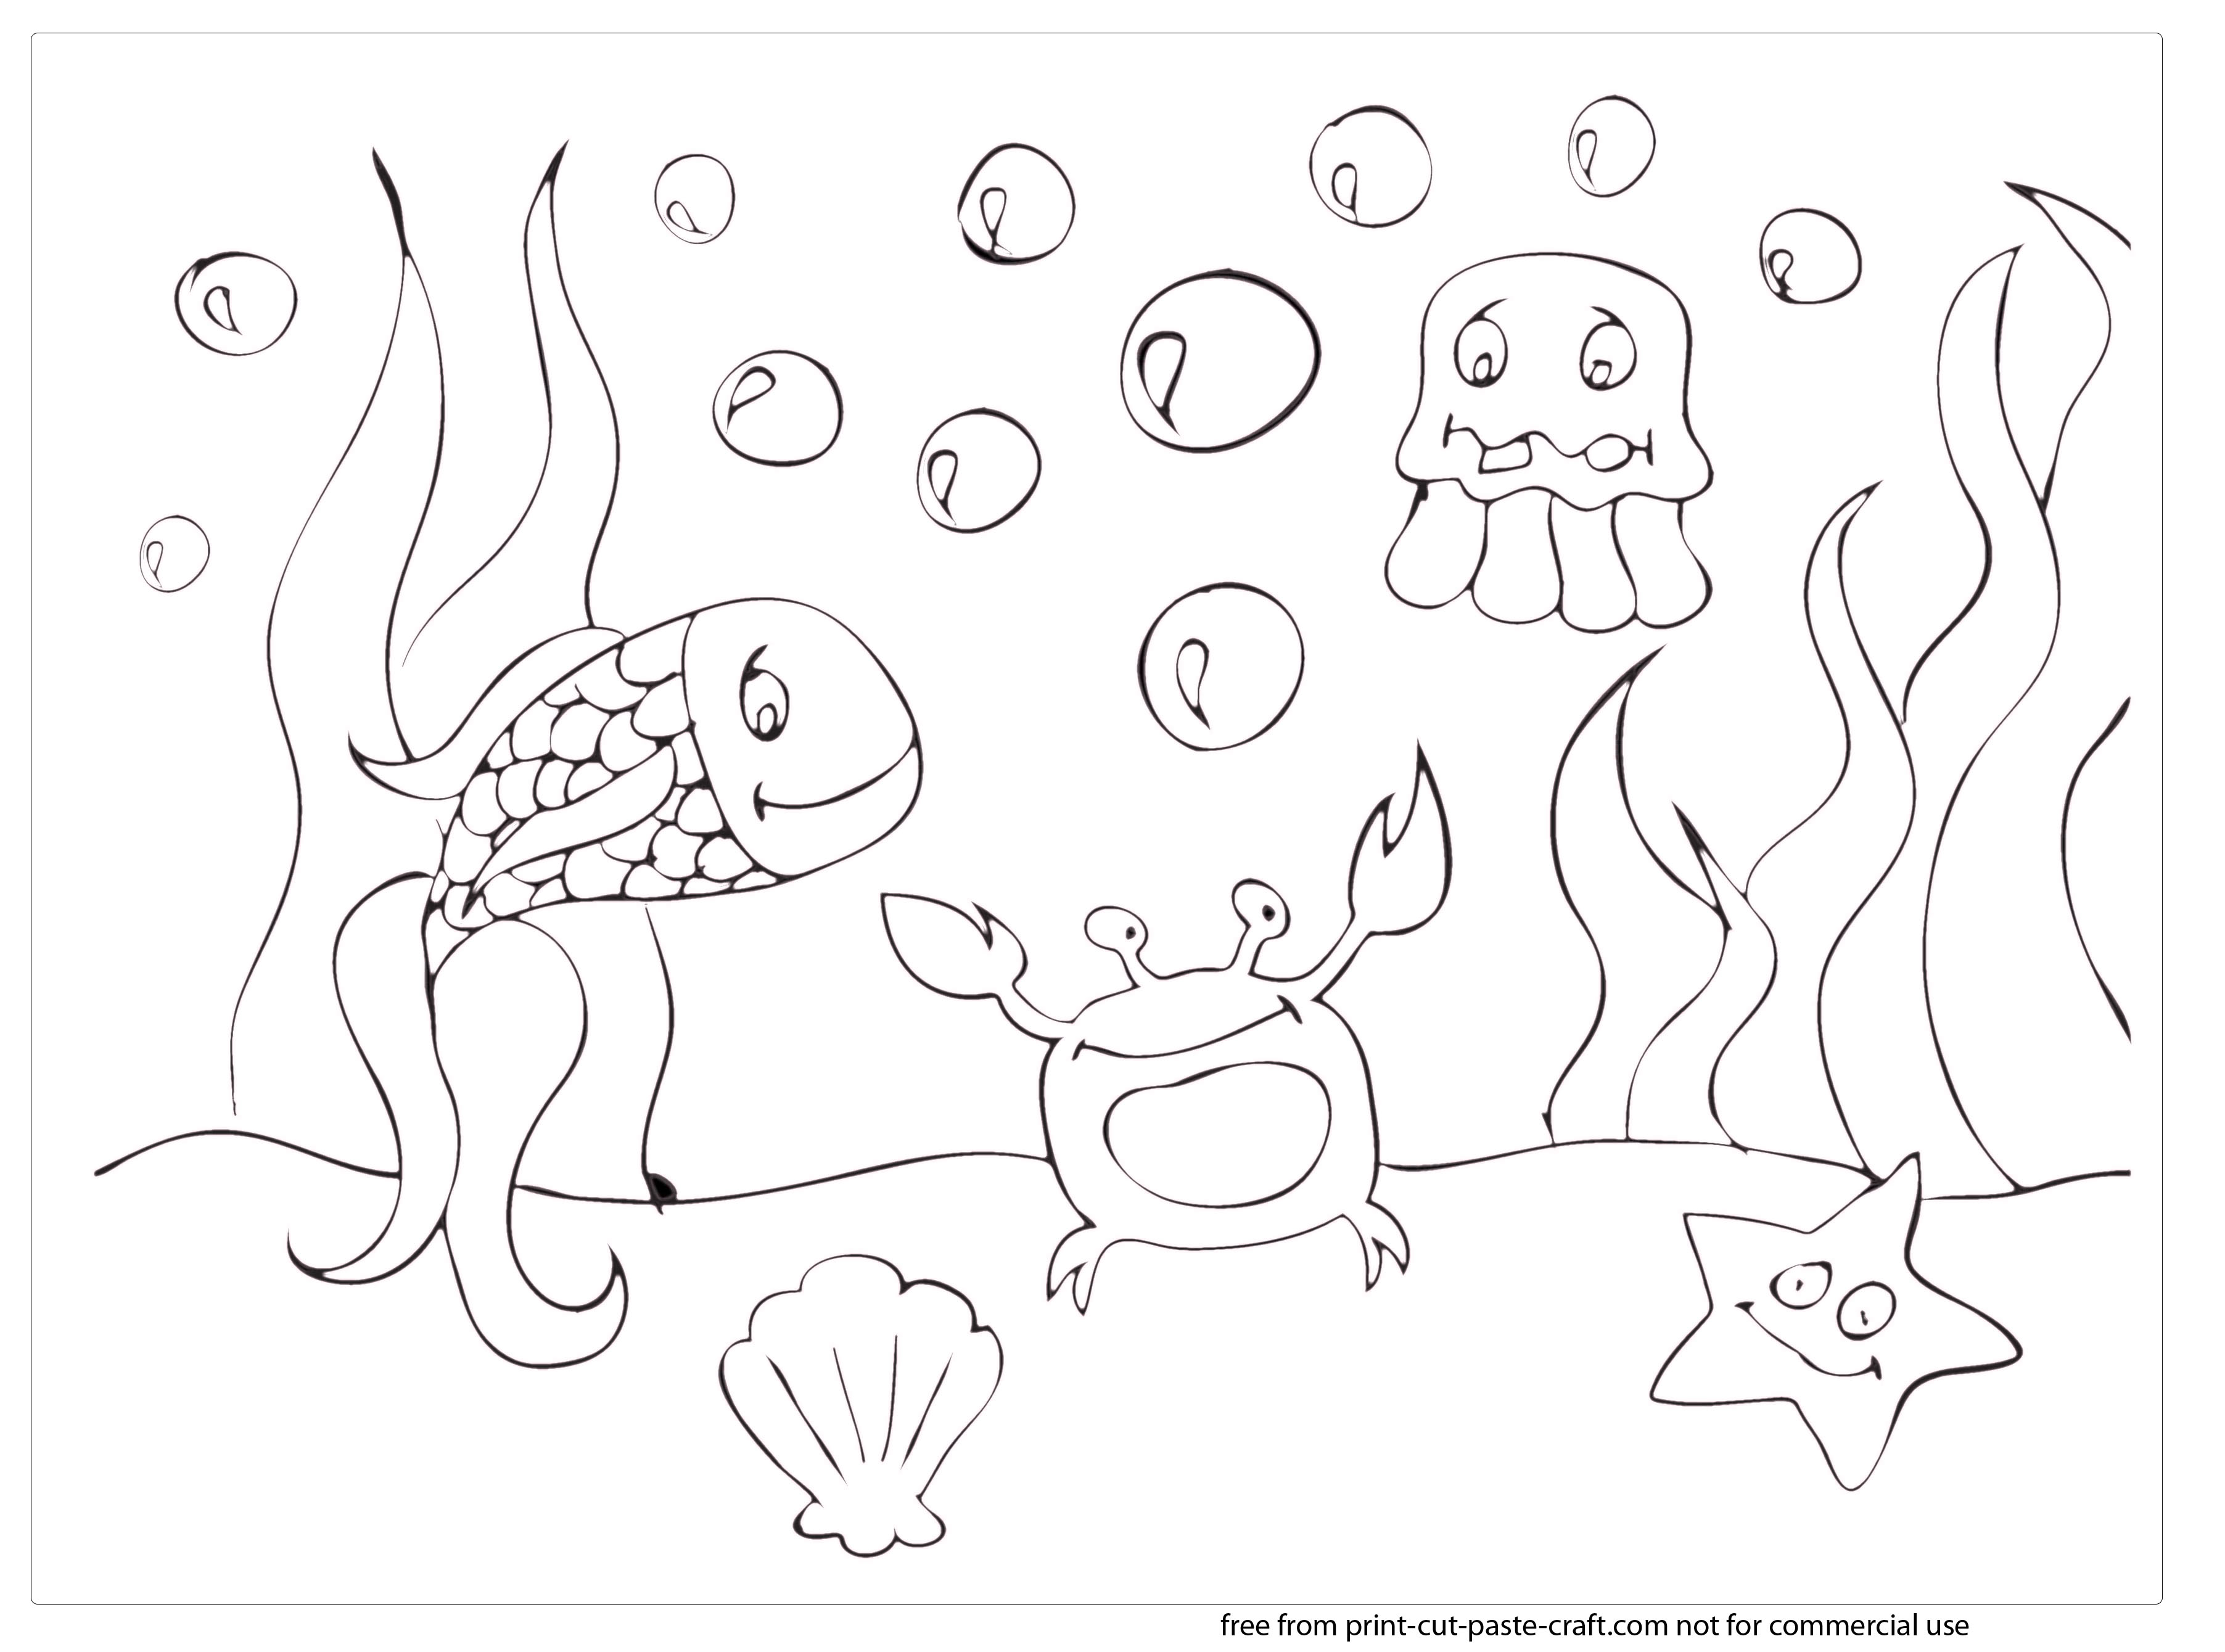 Sea coloring pages to download and print for free